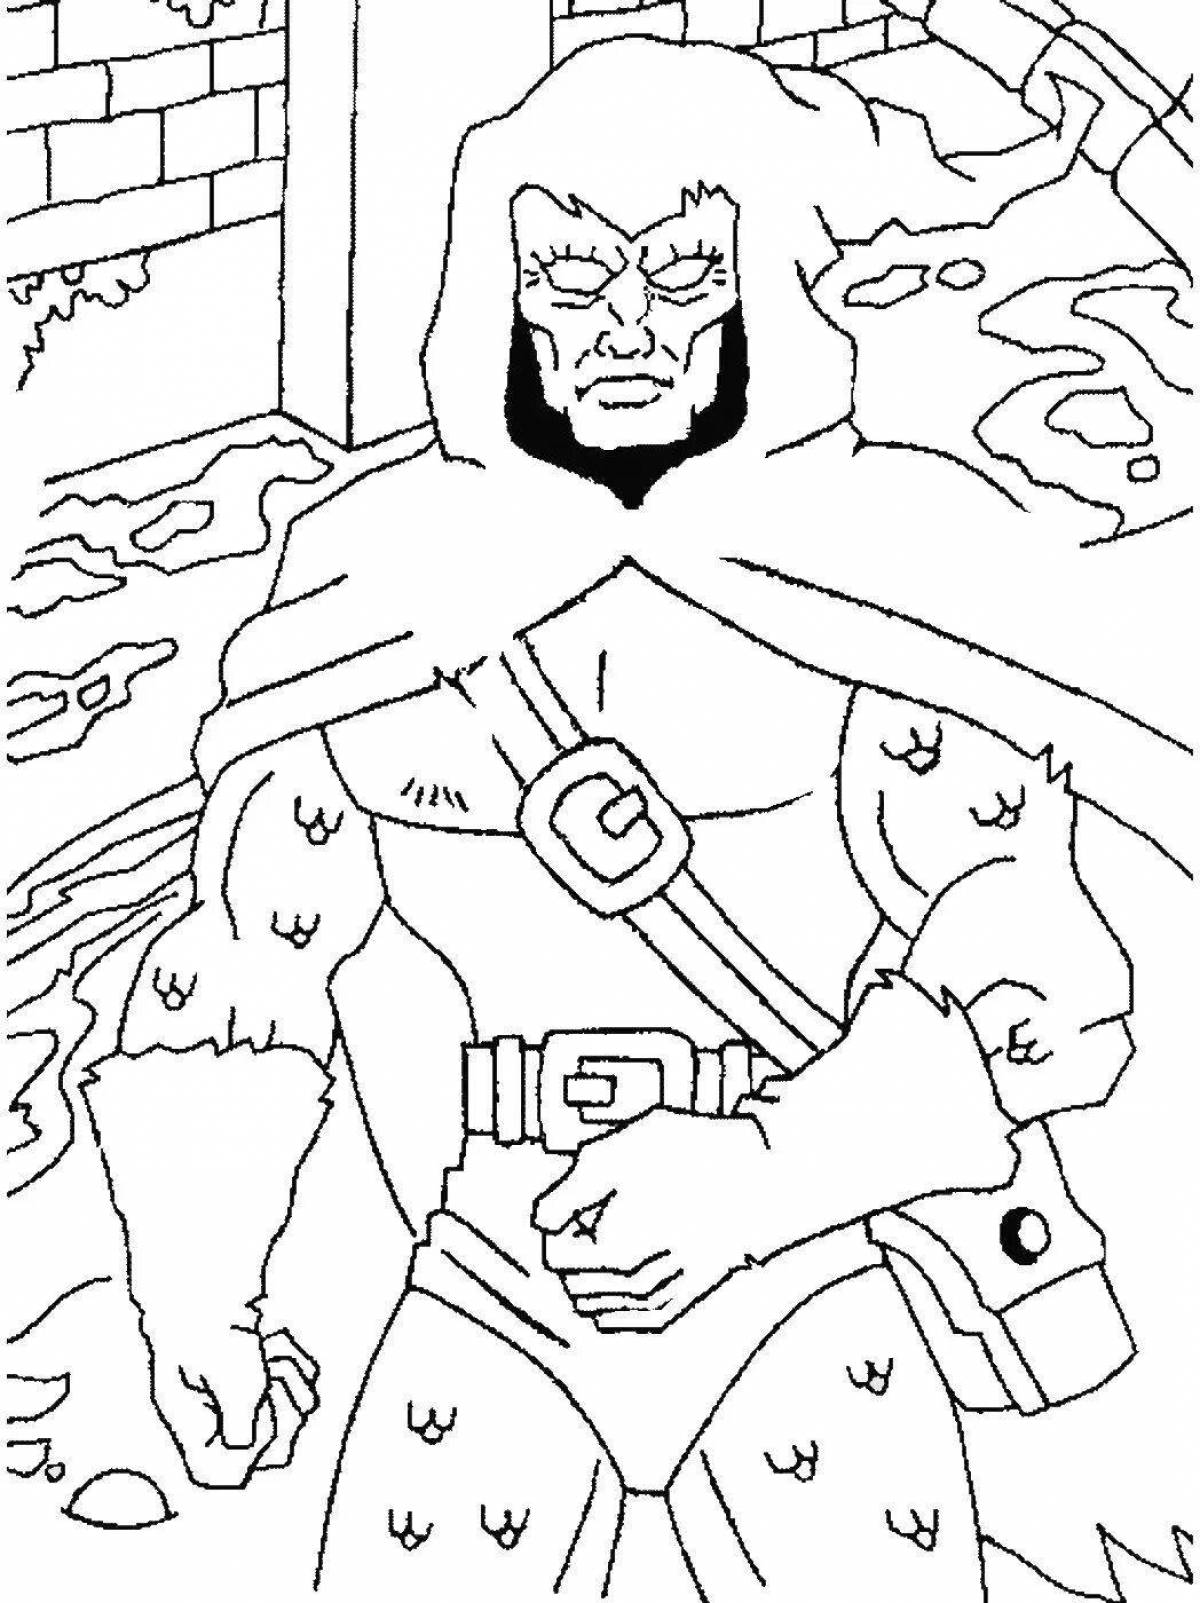 Sneaky supervillain coloring pages